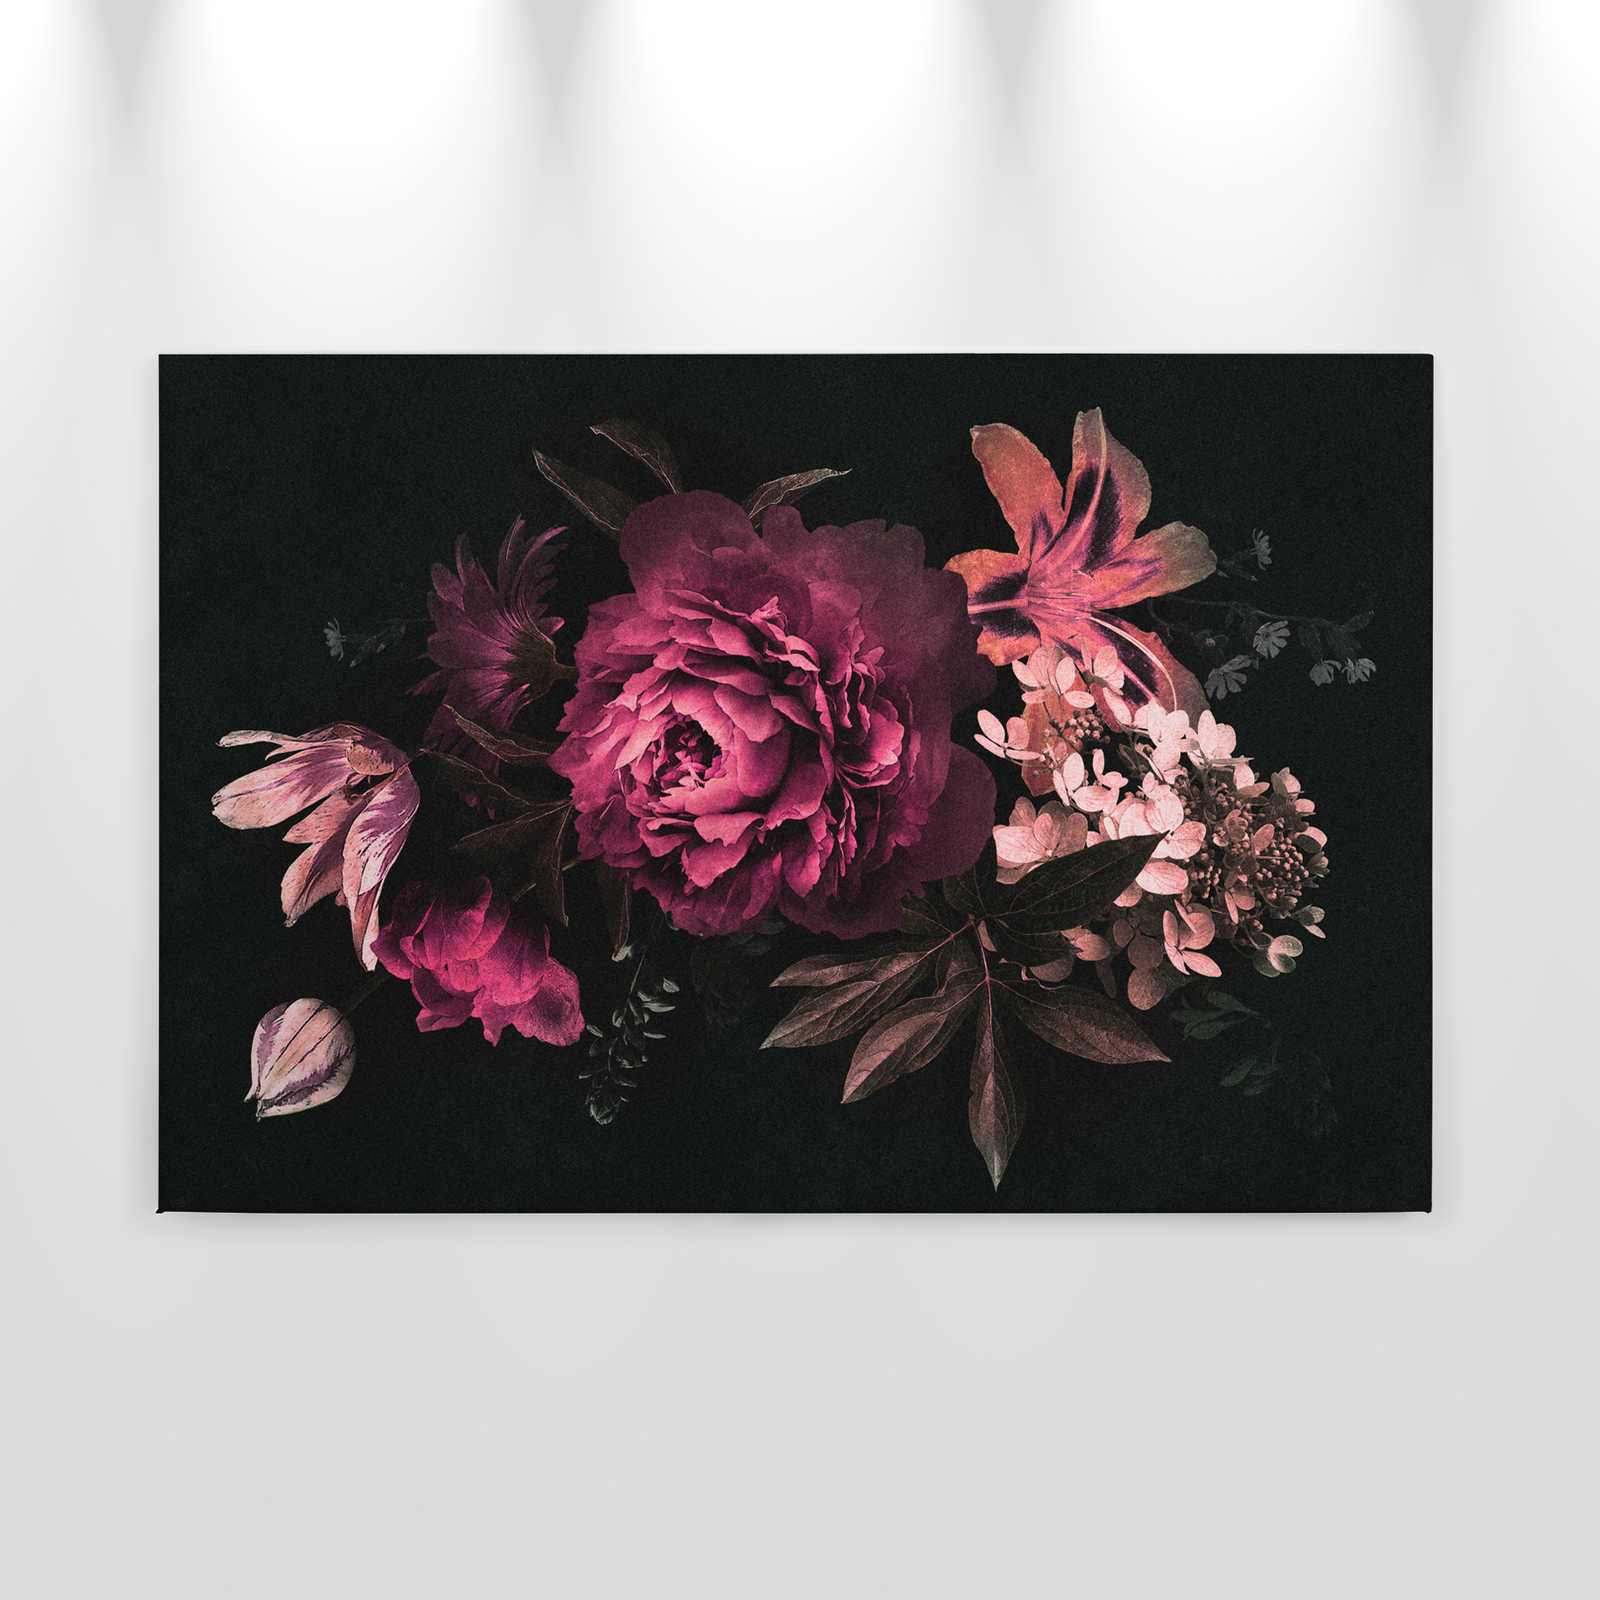             Drama queen 3 - Canvas painting romantic bouquet of flowers- Cardboard structure - 0.90 m x 0.60 m
        